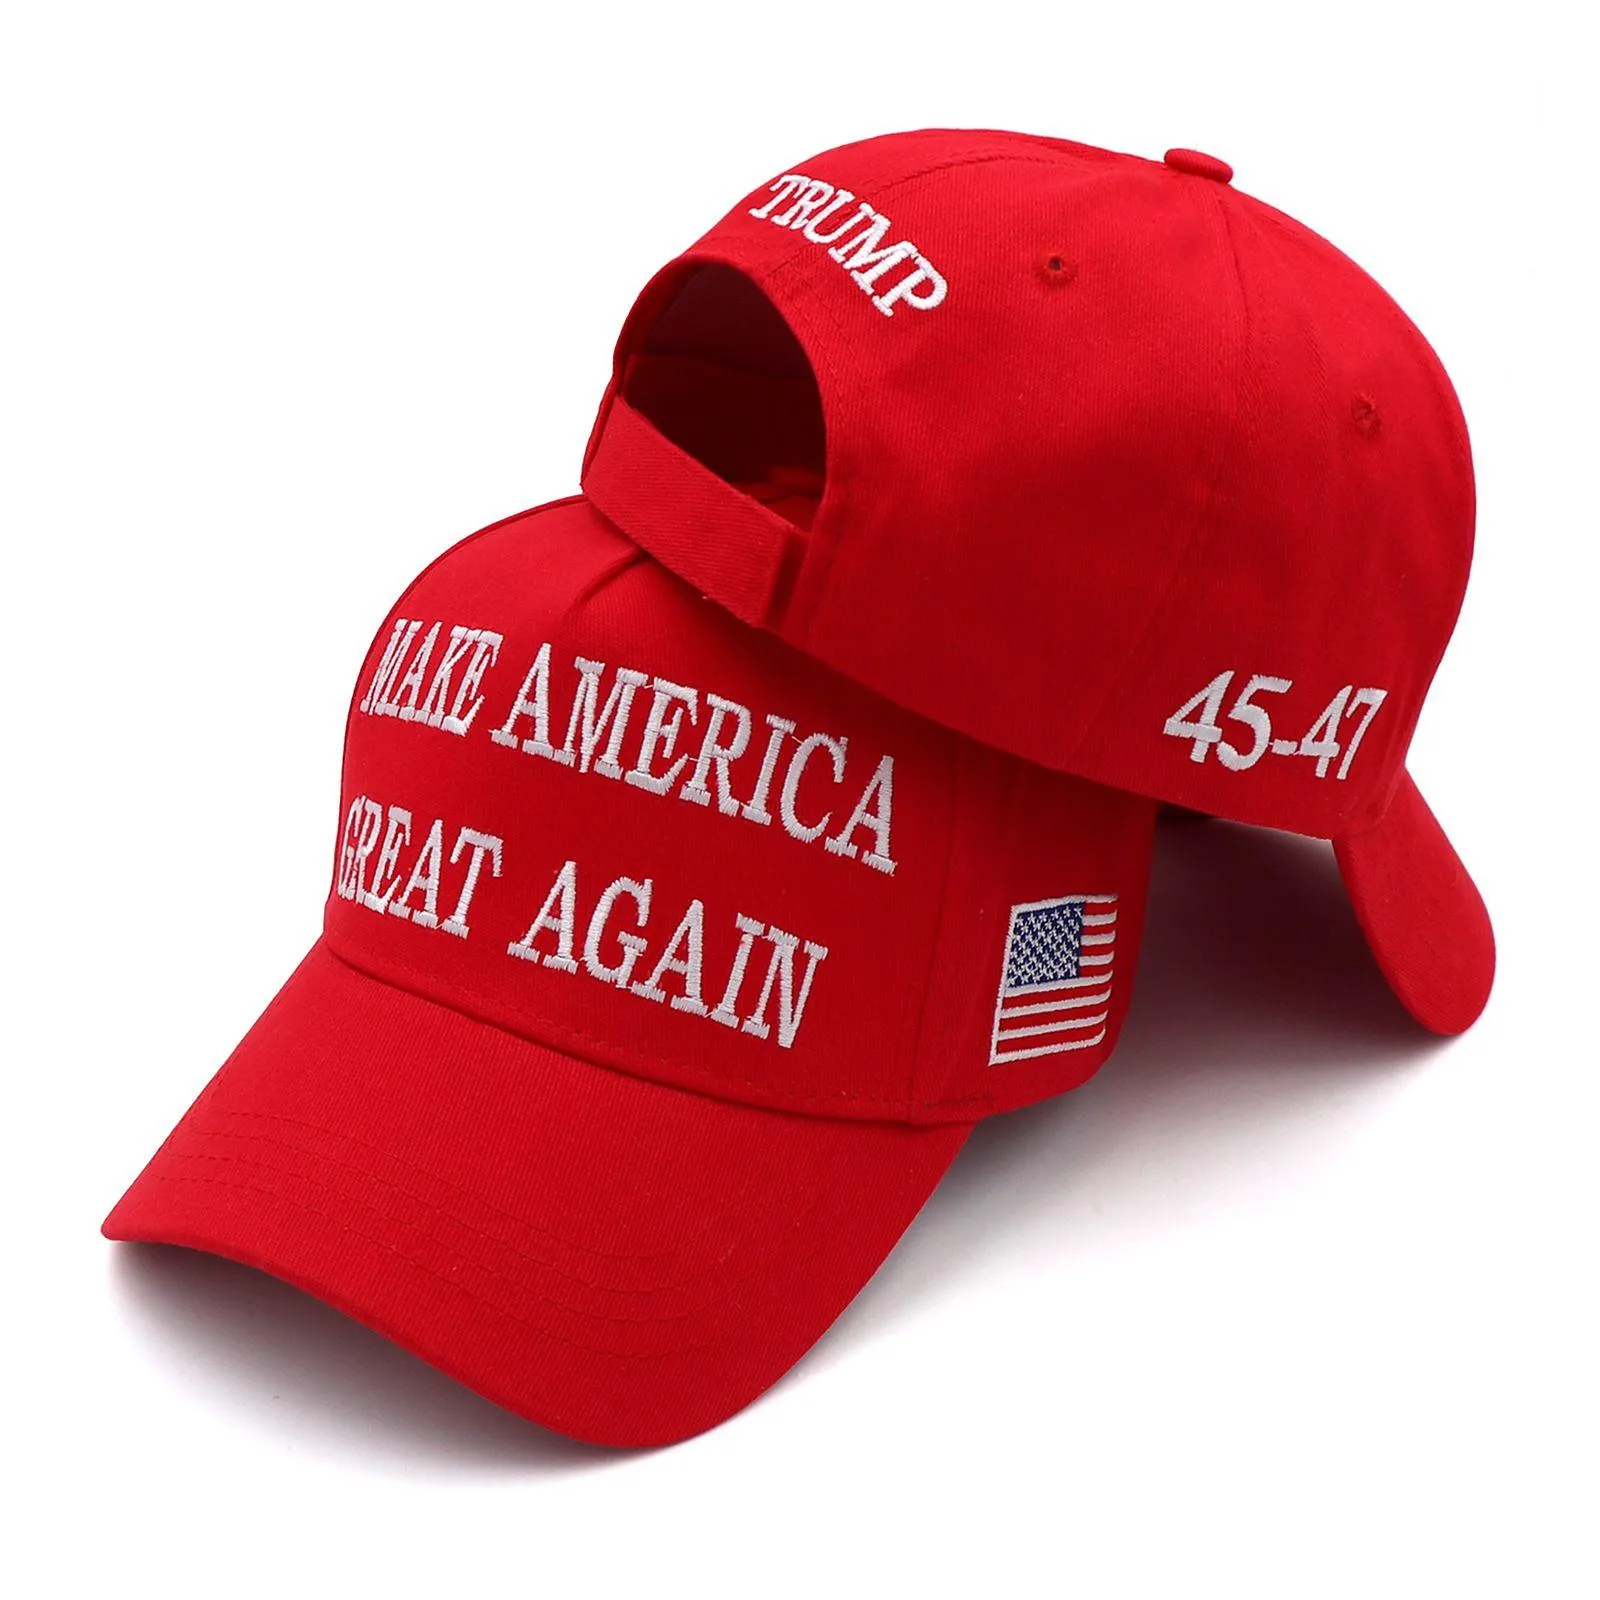 Party Hats Trump Activity Cotton Brodery Basebal Cap 45-47th Make America Great Again Sports Hat Drop Delivery Home Garden Festive DHP3D